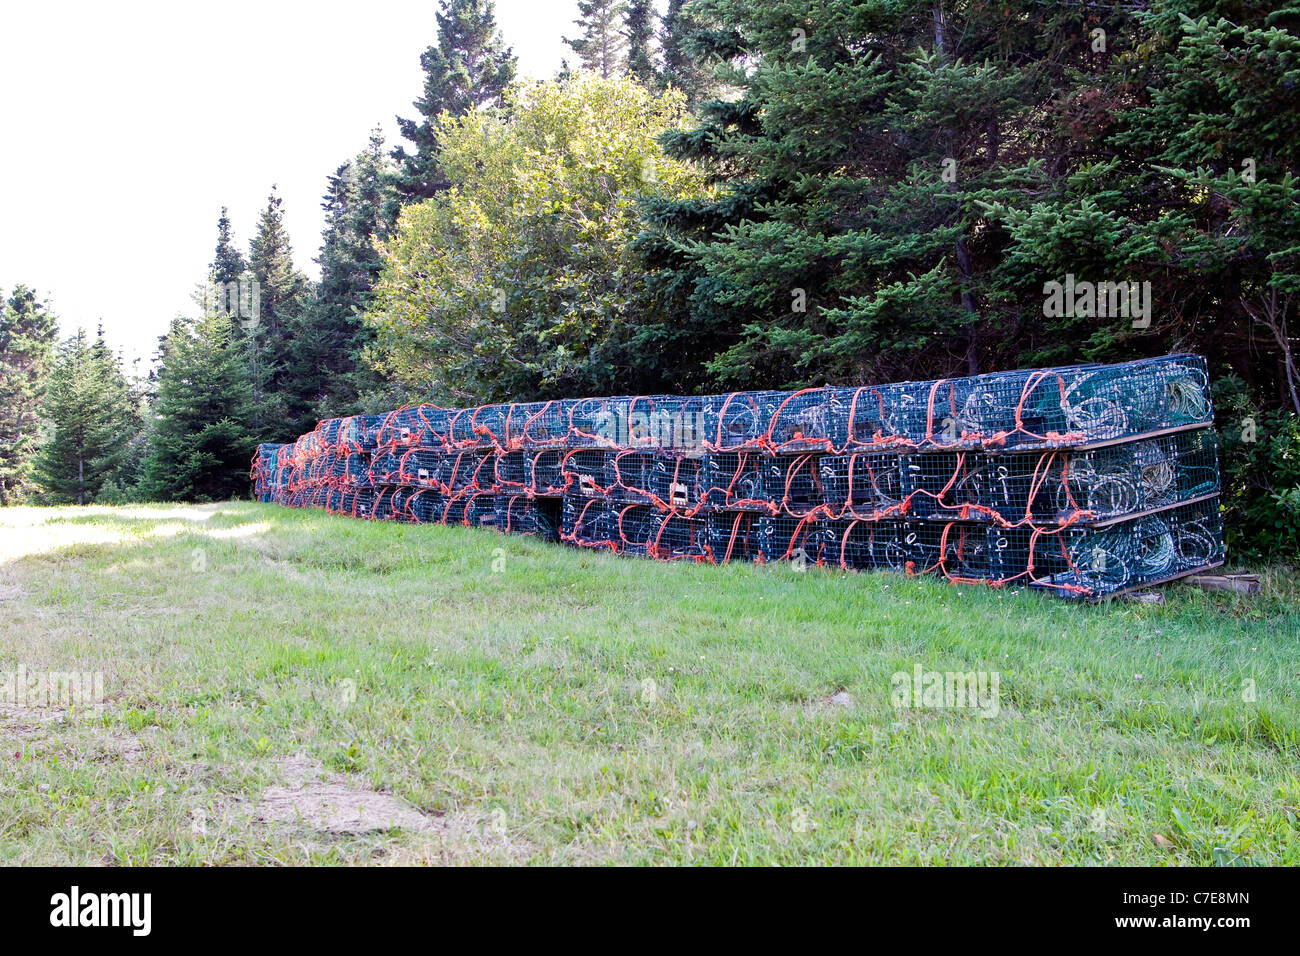 Lobster cages lined up in Bay of Fundy, New Brunswick, Canada. Stock Photo